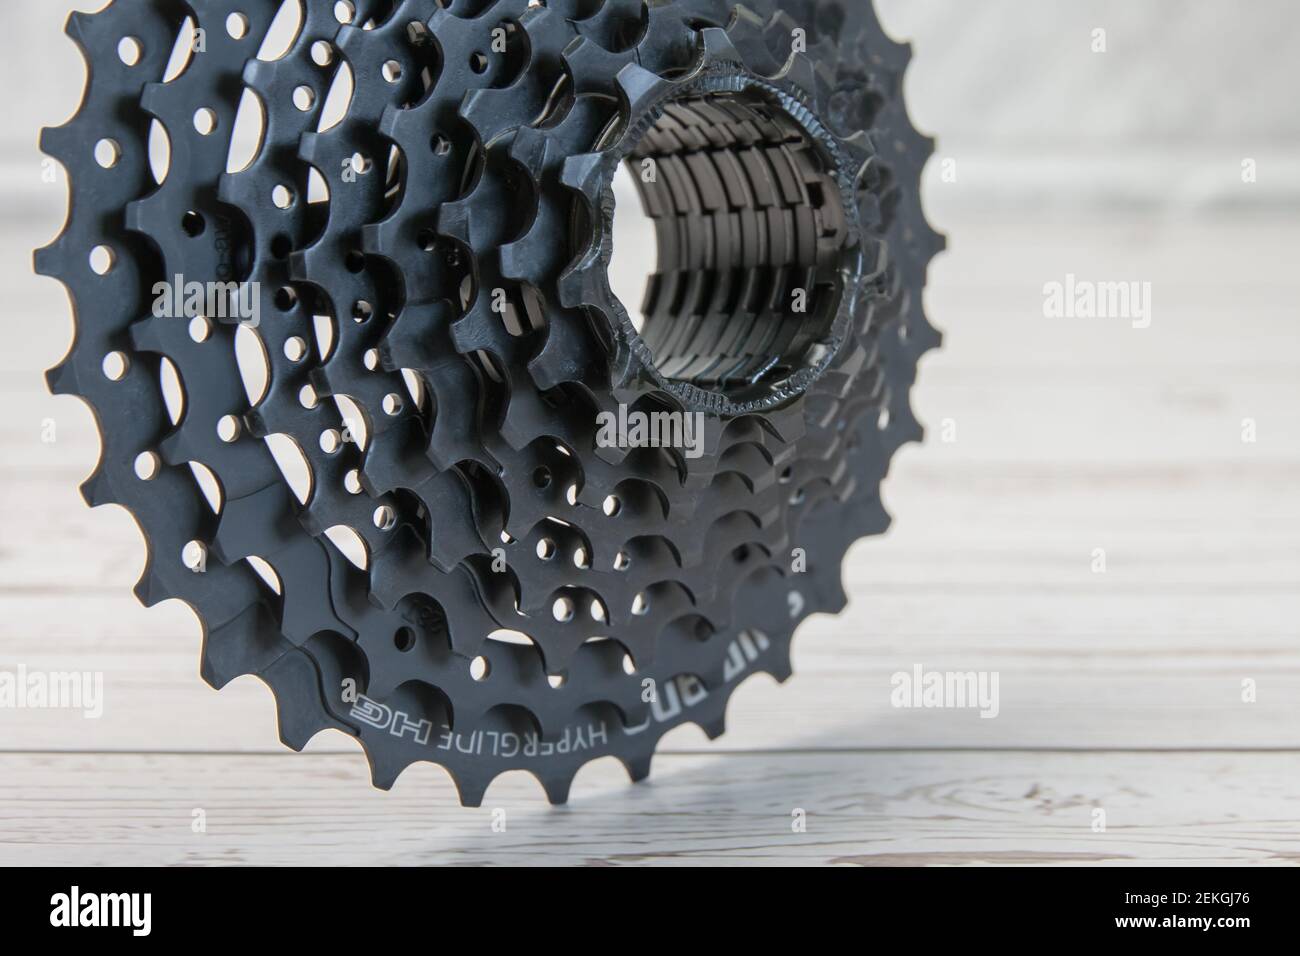 Krasnodar, Russia - February 12, 2021: The new black Shimano bike cassette stands with its teeth on the boards Stock Photo